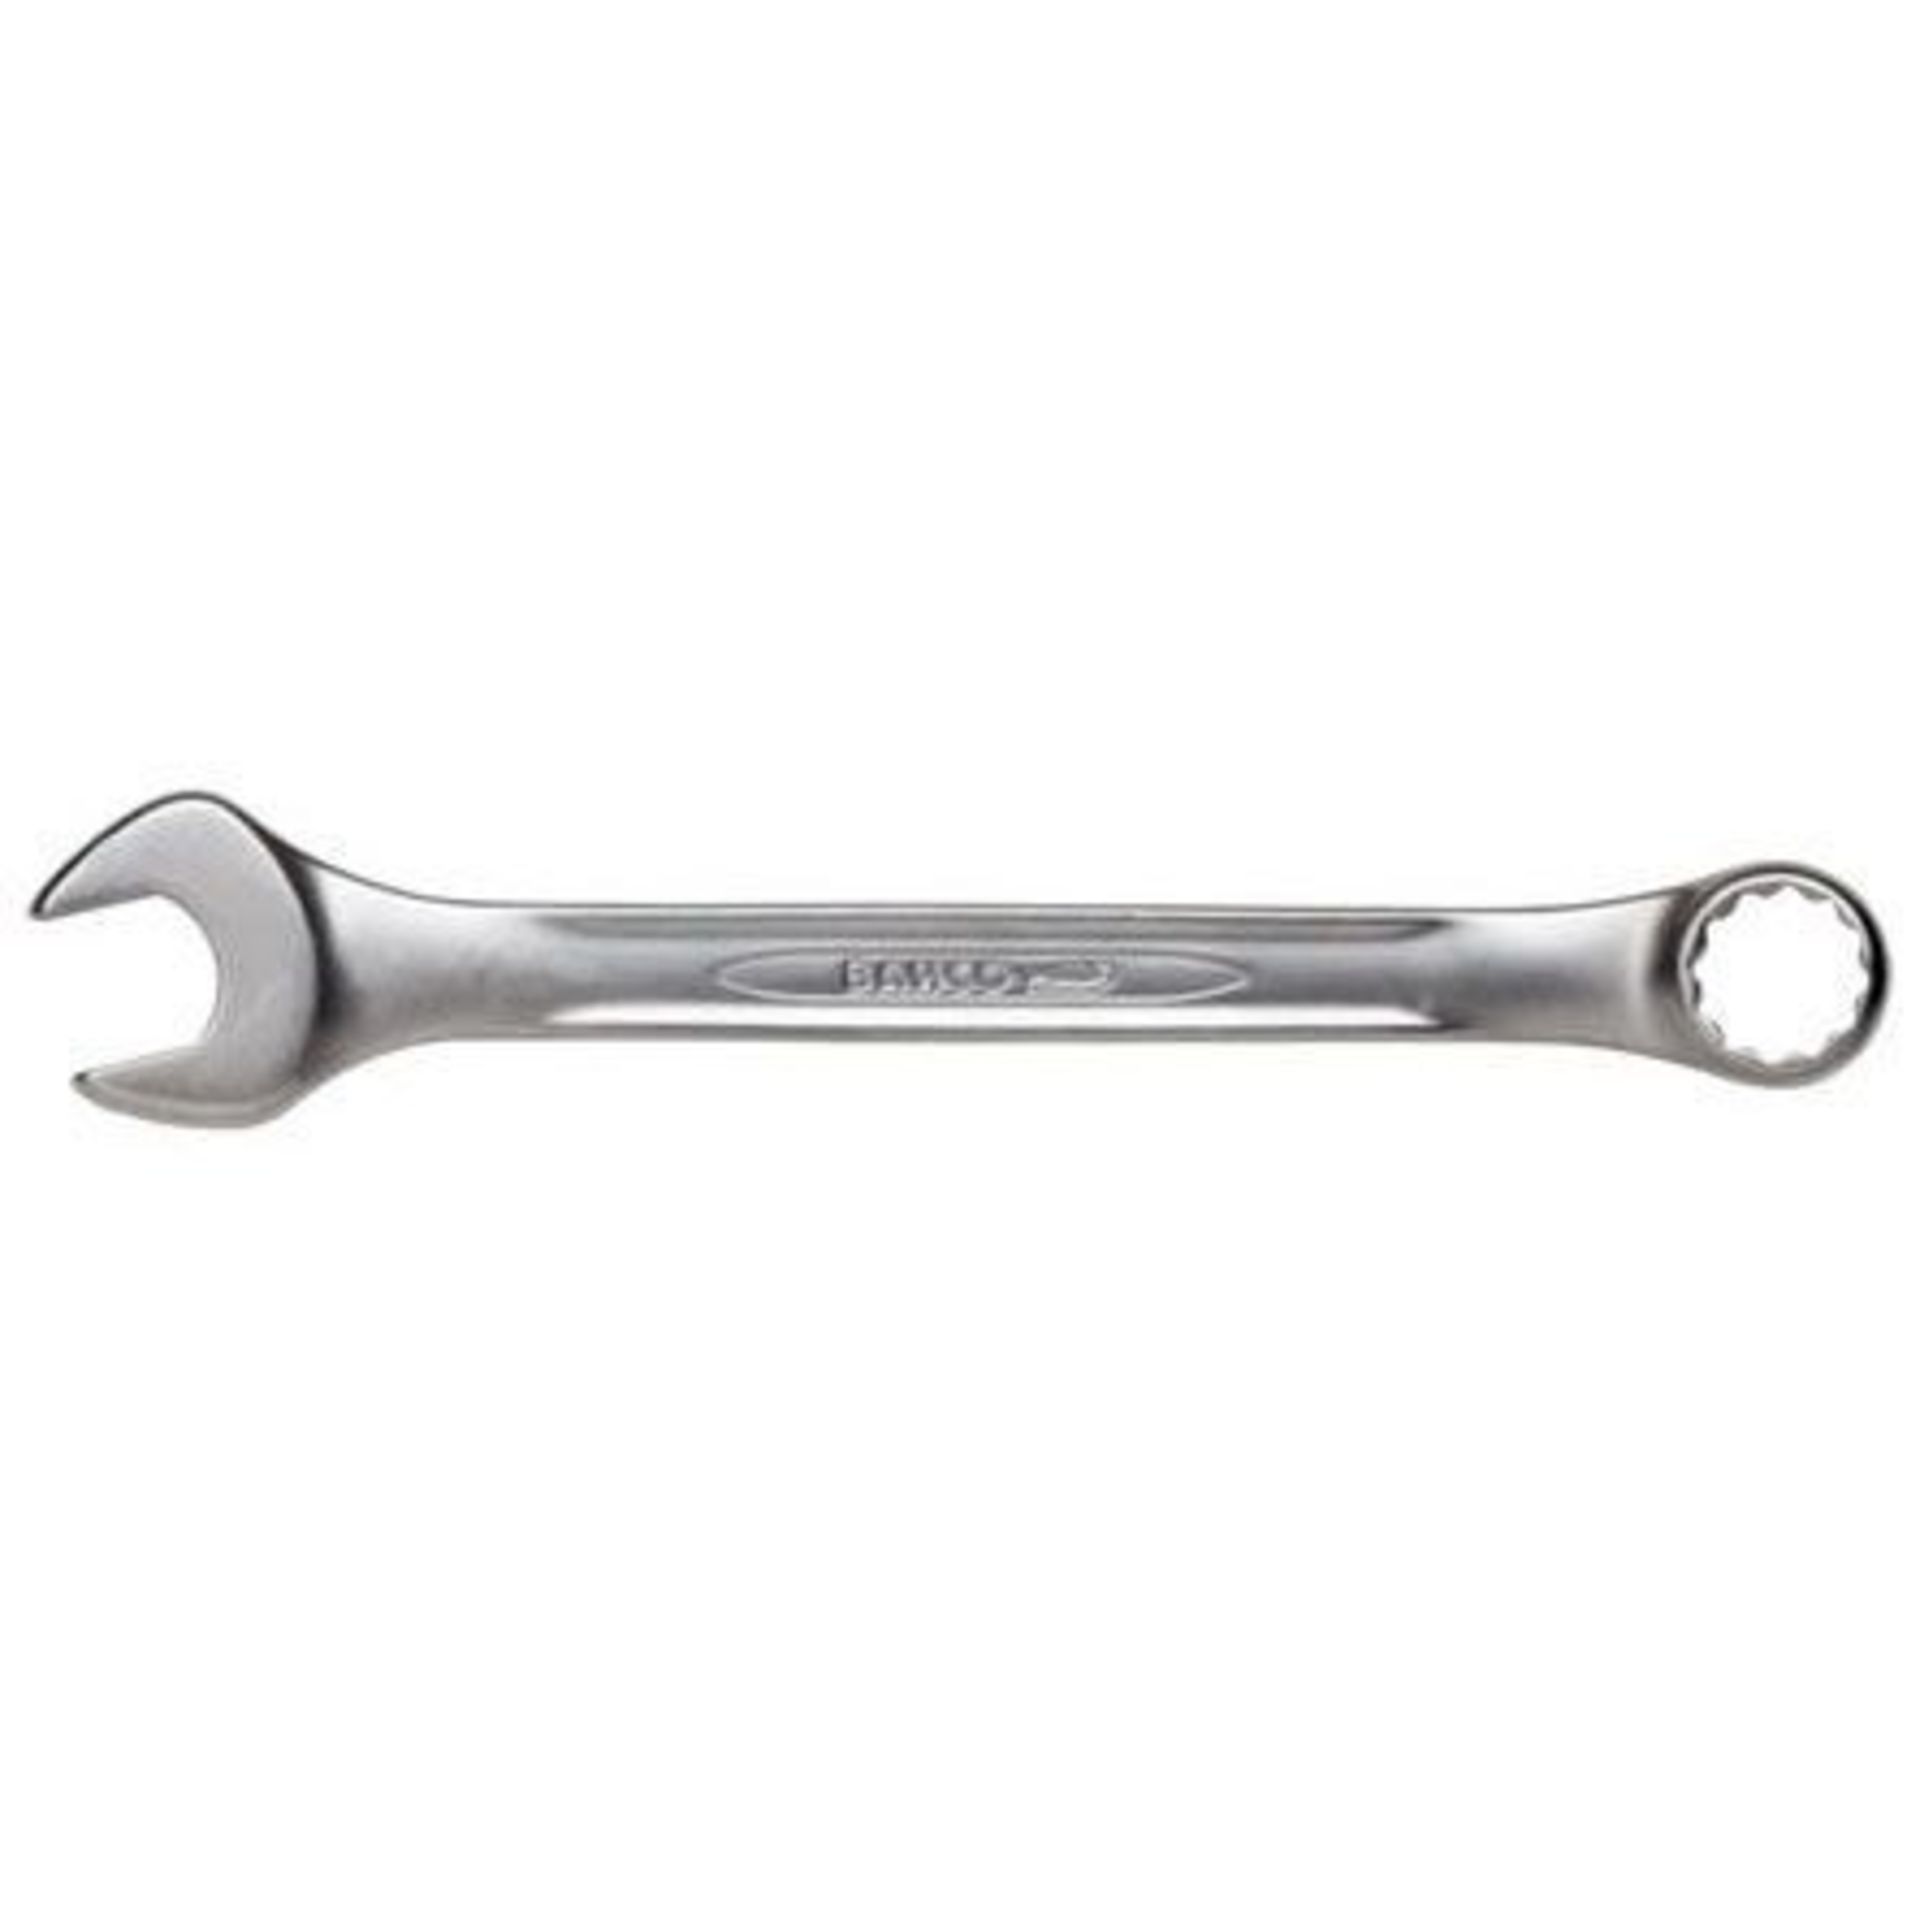 100 x Bahco 1 1/8 in Combination Spanner / Wrench, Alloy Steel